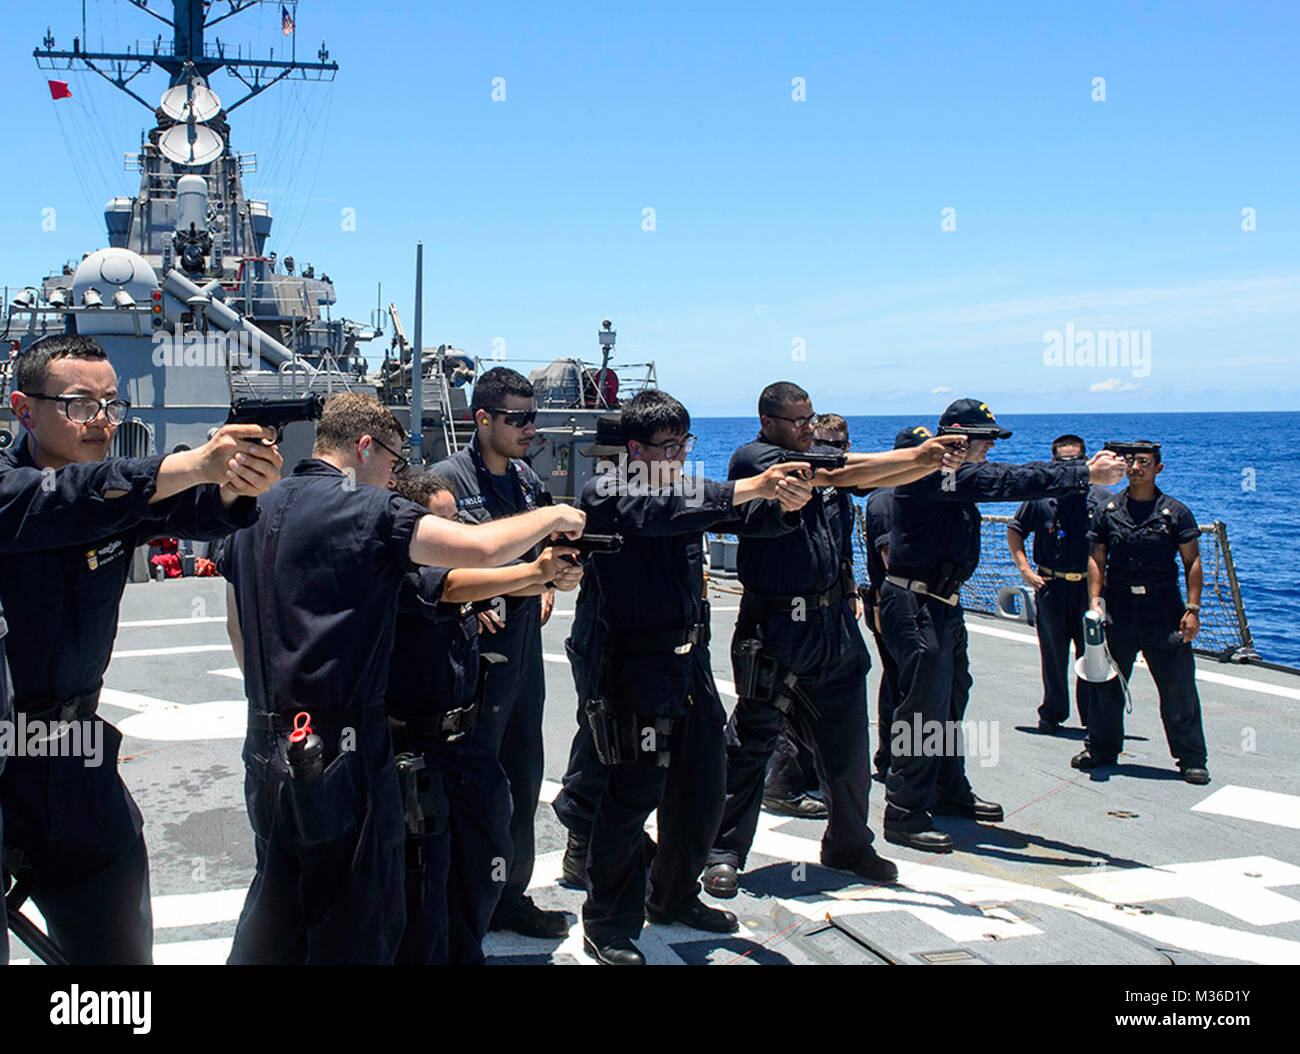 160620-N-YB832-080 PHILIPPINE SEA (June 20, 2016) Ð Sailors assigned to the guided-missile destroyer USS Curtis Wilbur (DDG 54), aim M9 Beretta pistols at their targets during a small-arms weapons qualification on the flight deck. Curtis Wilbur is on patrol with Carrier Strike Group Five (CSG 5) in the U.S. 7th Fleet area of responsibility supporting security and stability in the Indo-Asia-Pacific. (U.S. Navy photo by Mass Communication Specialist 3rd Class Ellen Hilkowski/Released) Sailors shoot pistols while at sea to keep shooting skills sharp by #PACOM Stock Photo